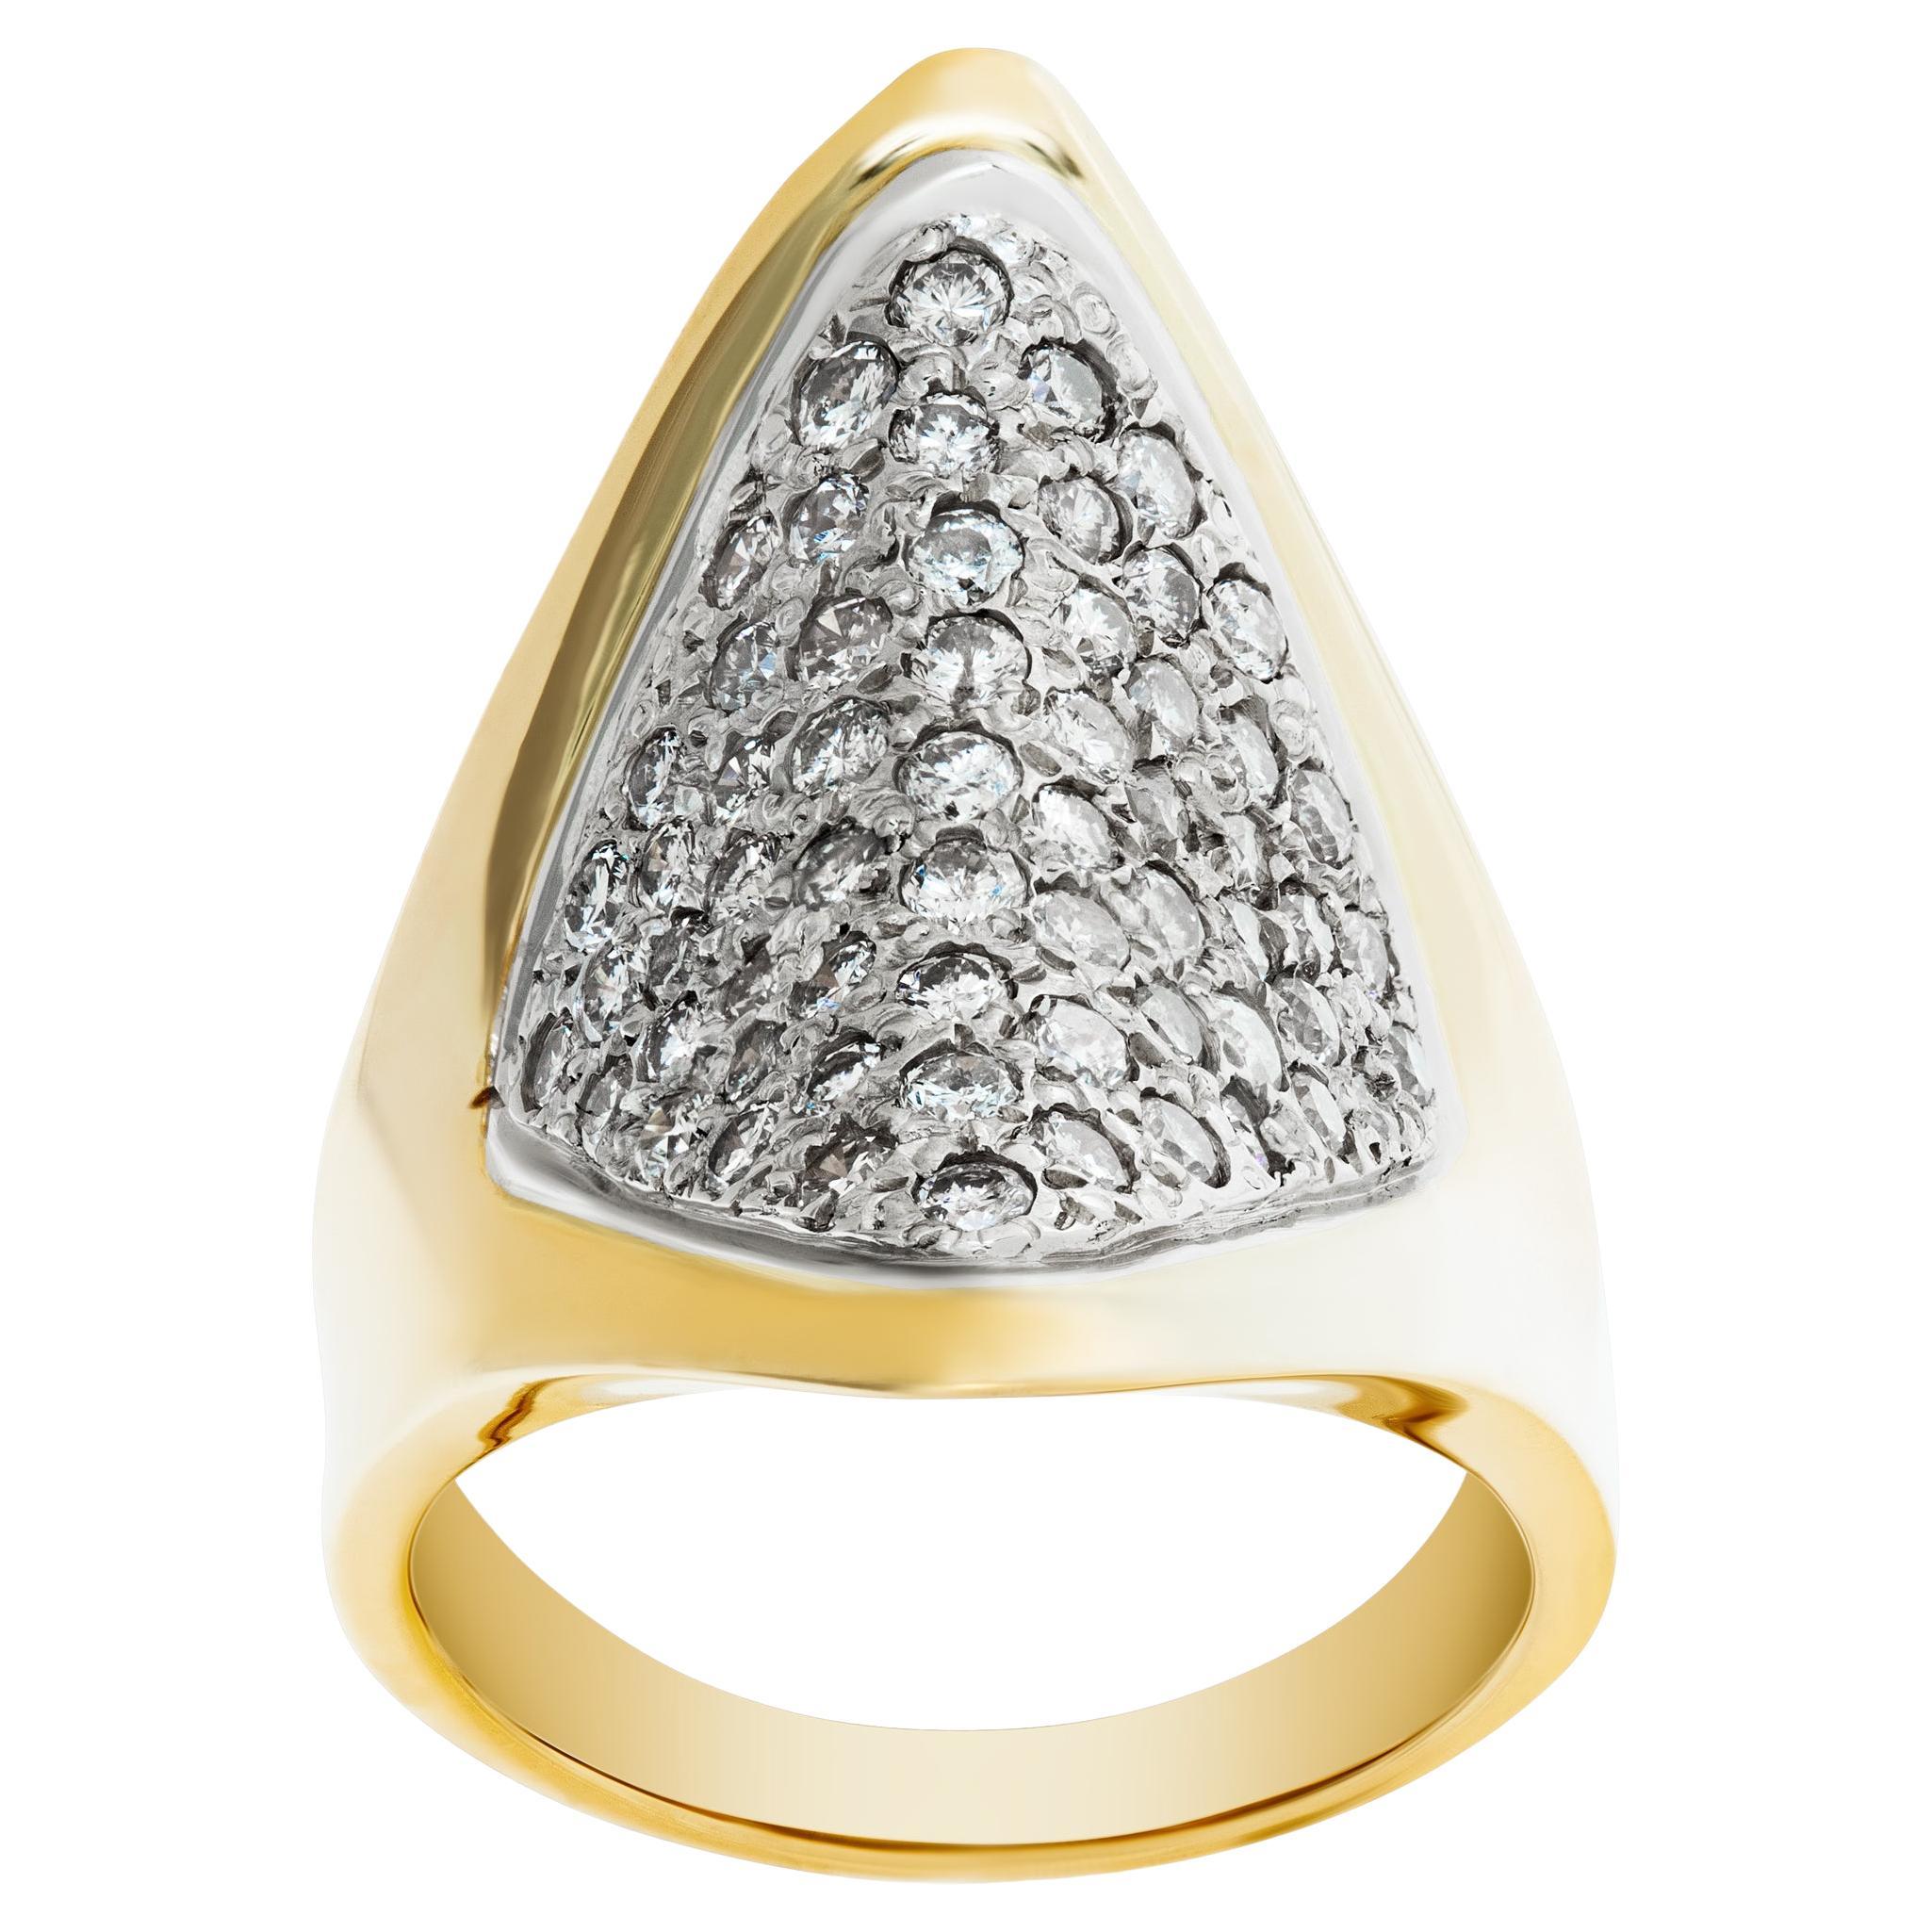 Modern Round brilliant cut diamonds ring in yellow gold approx.weight 1.00 carat